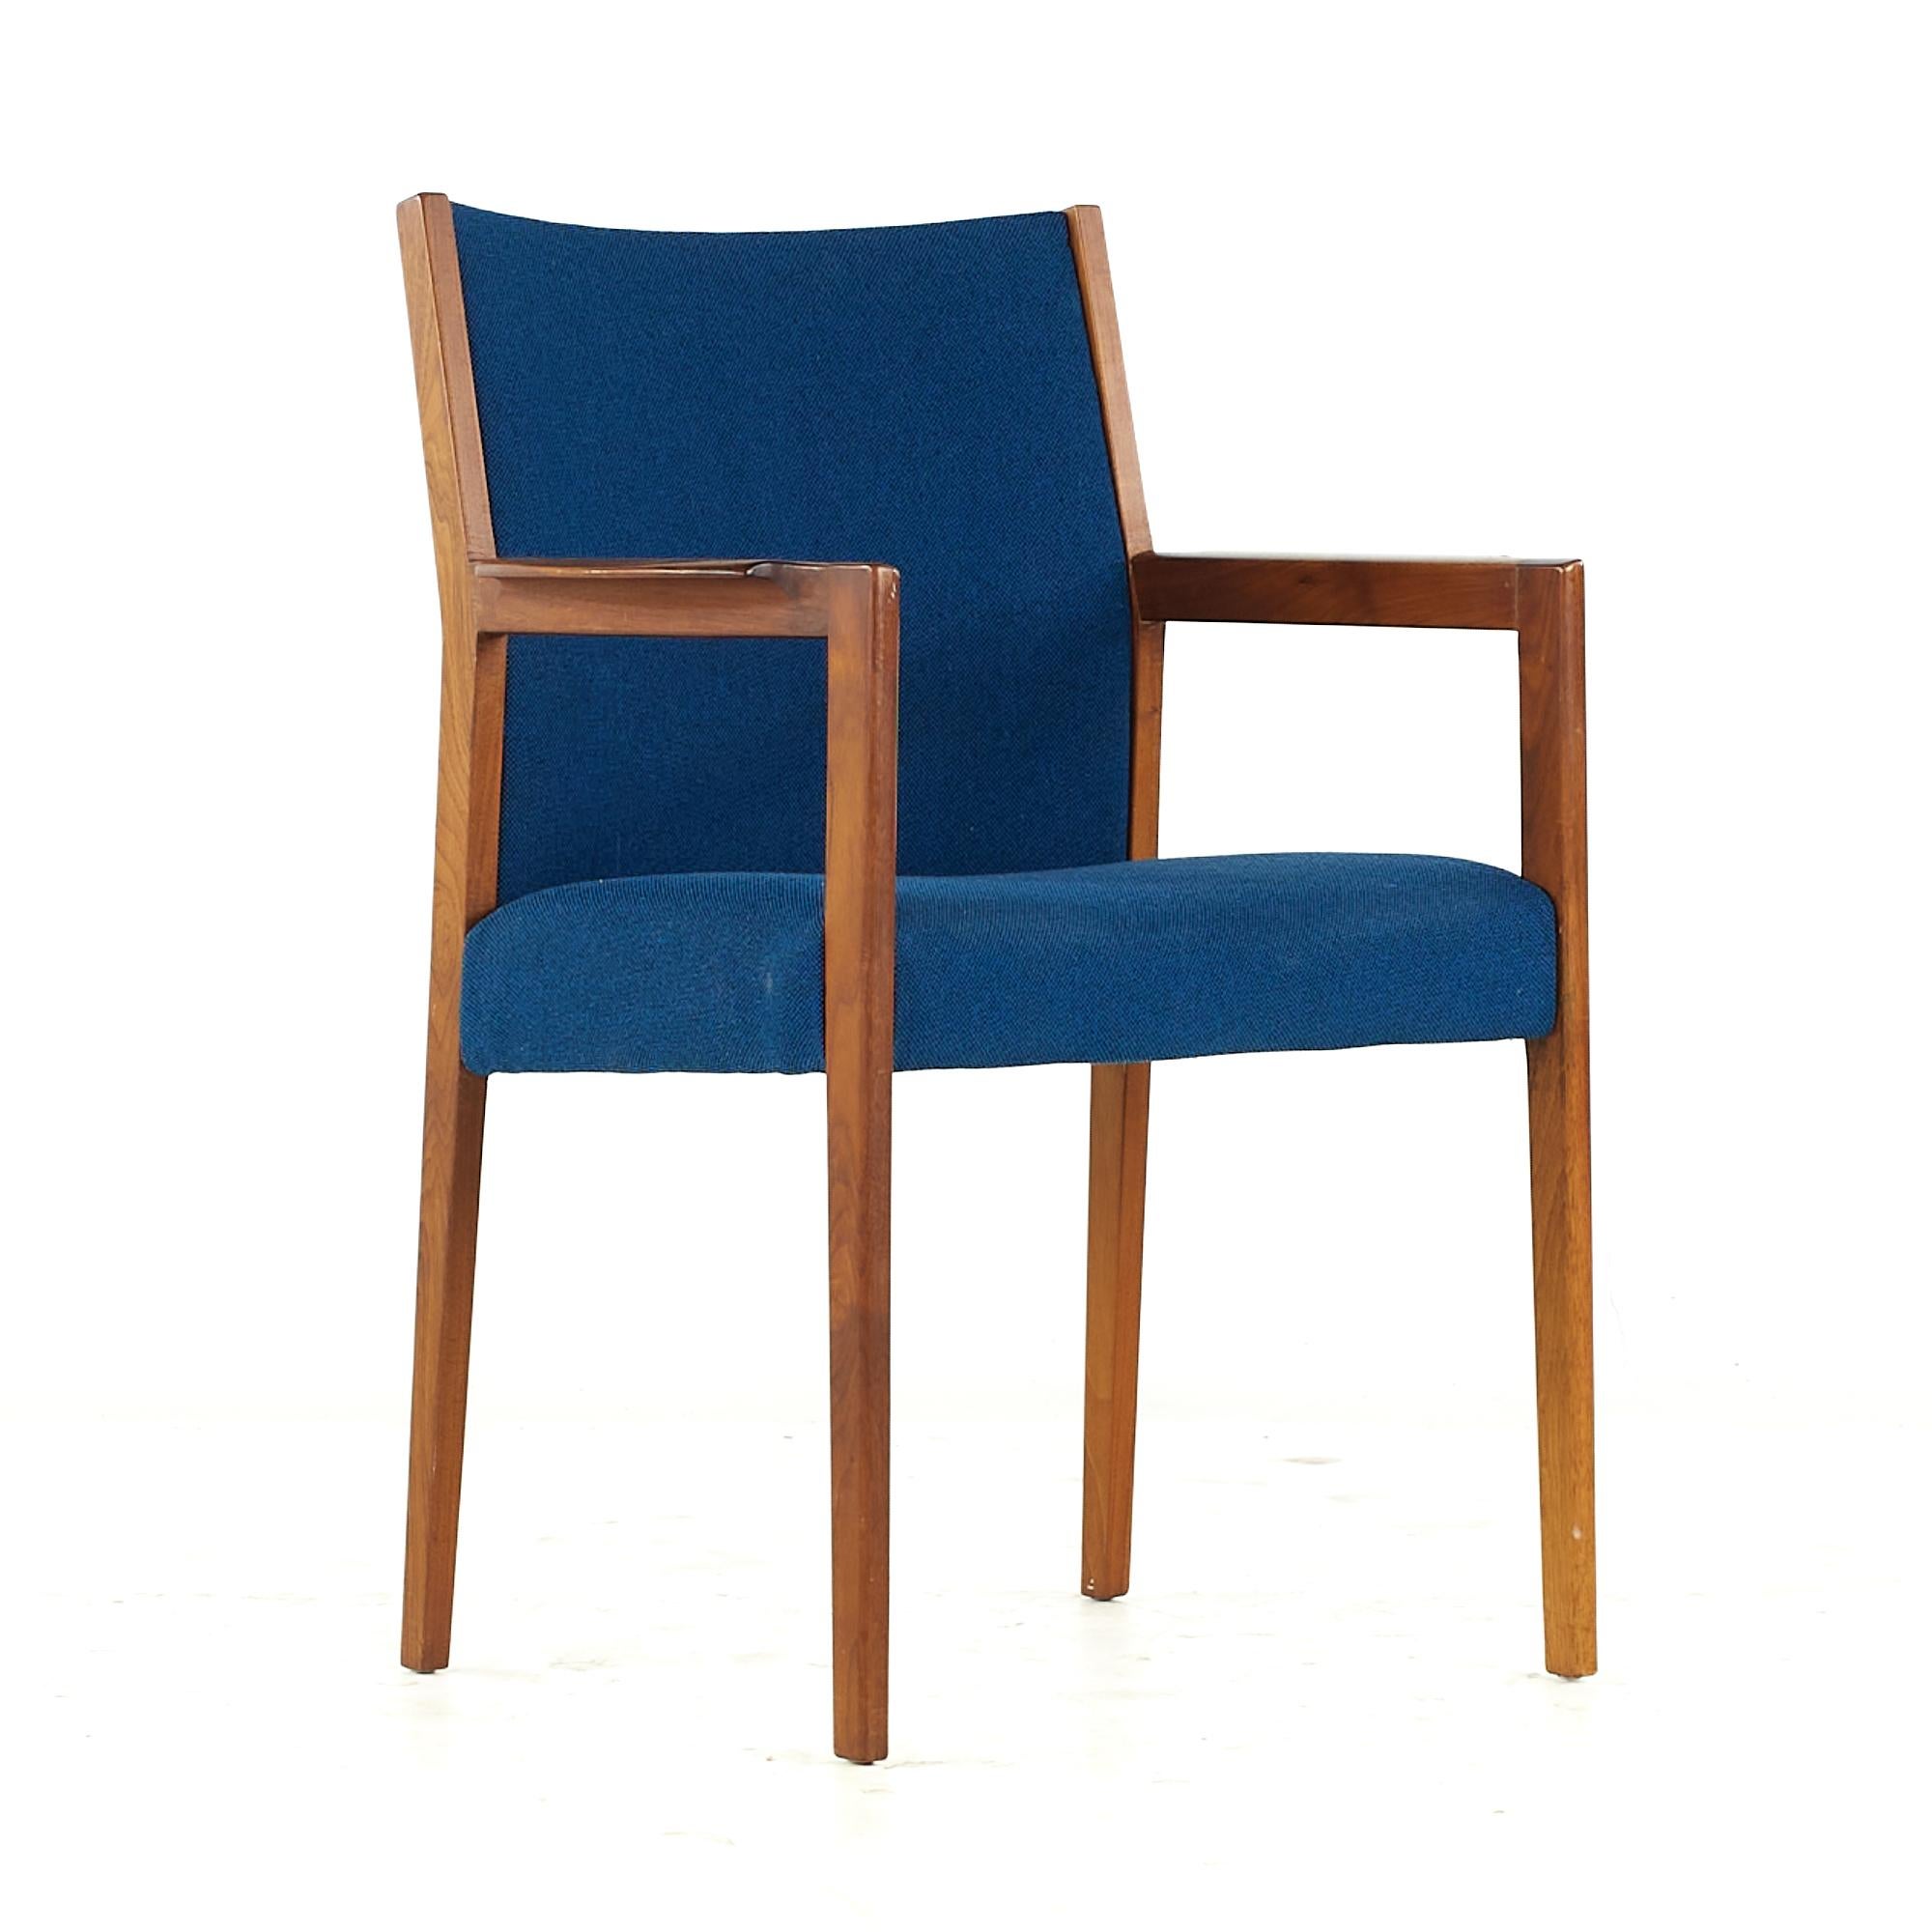 Jens Risom Midcentury Cane and Walnut Dining Chairs, Set of 6 For Sale 4